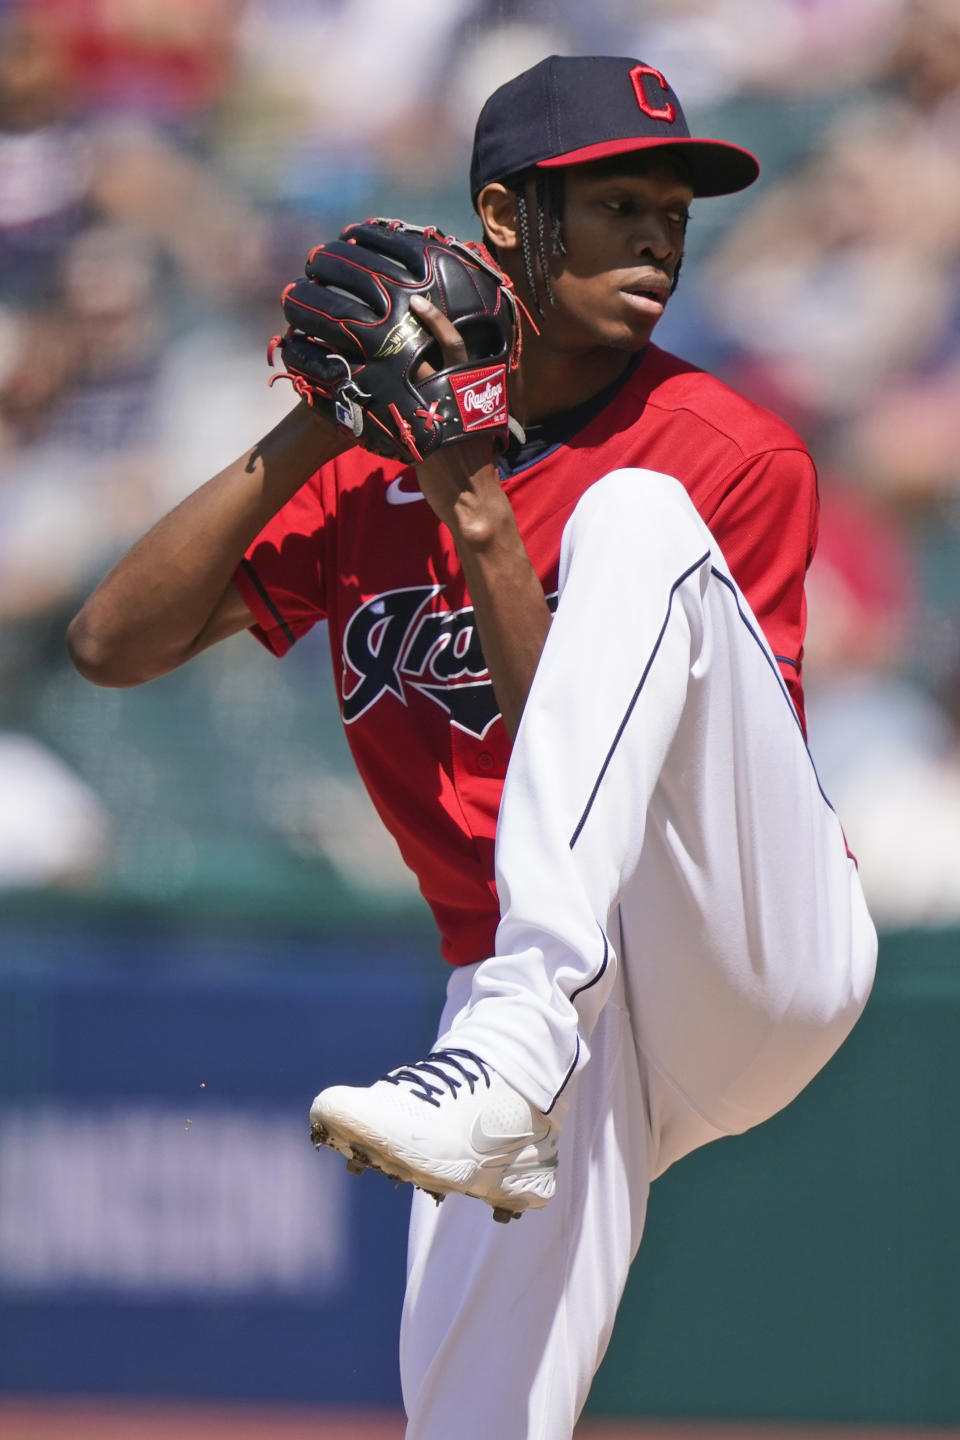 Cleveland Indians starting pitcher Triston McKenzie delivers in the first inning of the first baseball game of a doubleheader against the Chicago White Sox, Monday, May 31, 2021, in Cleveland. (AP Photo/Tony Dejak)